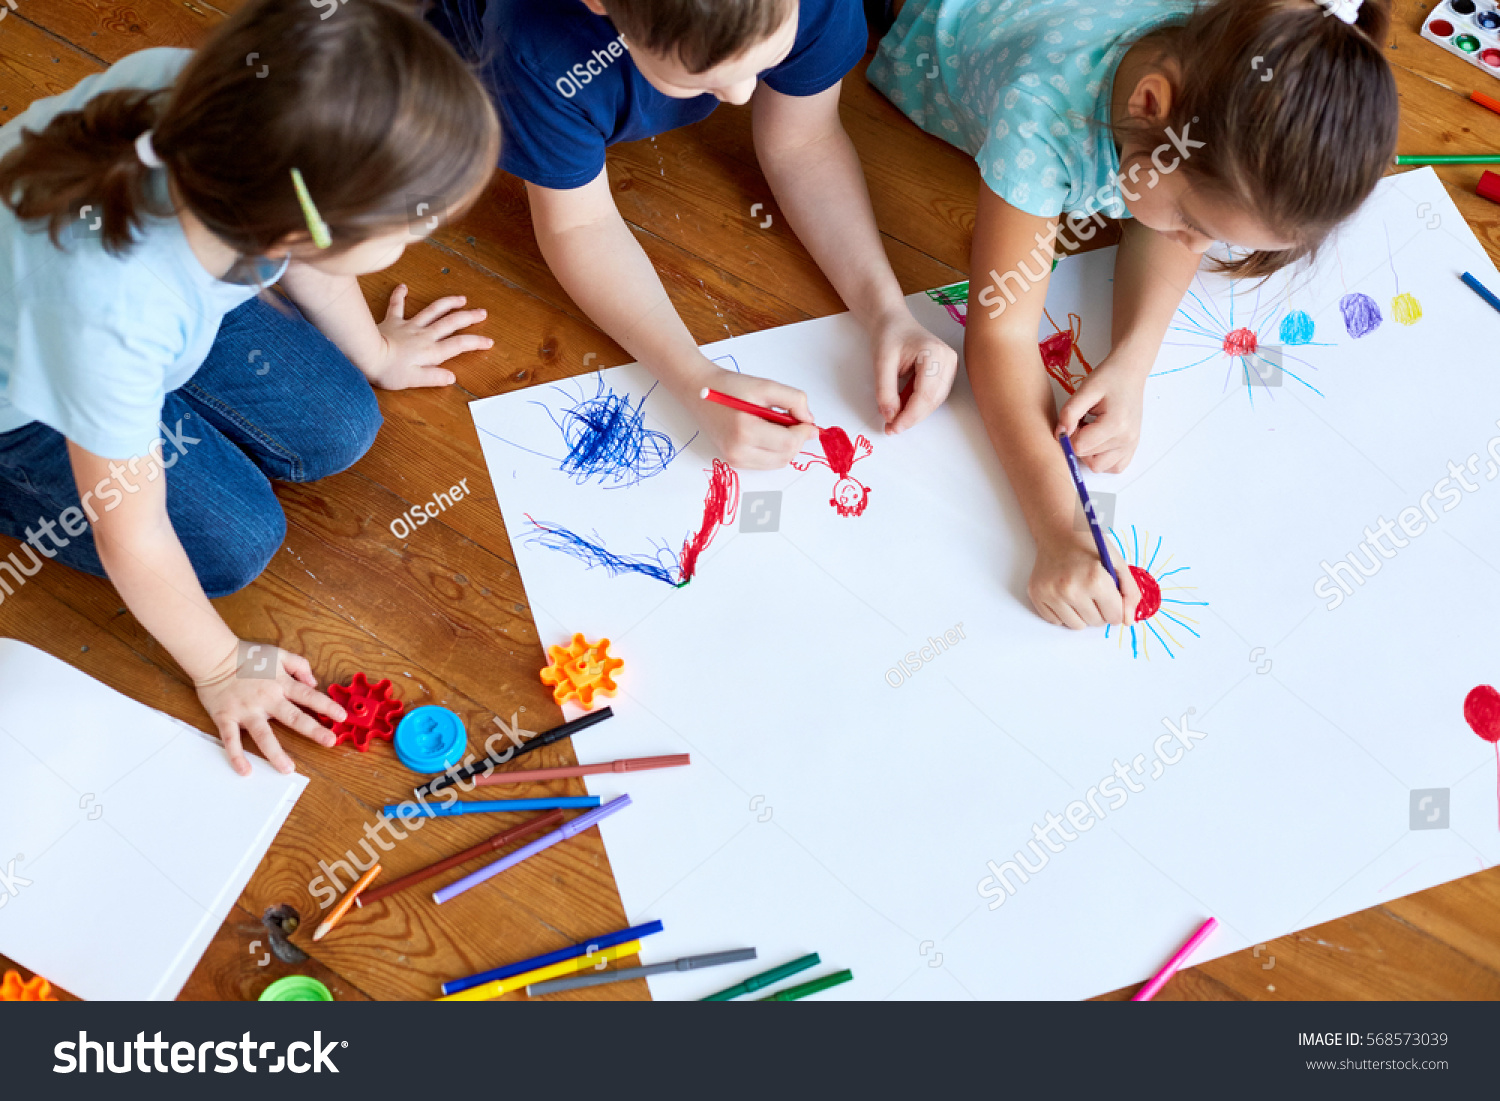 Children Drawing Together #568573039